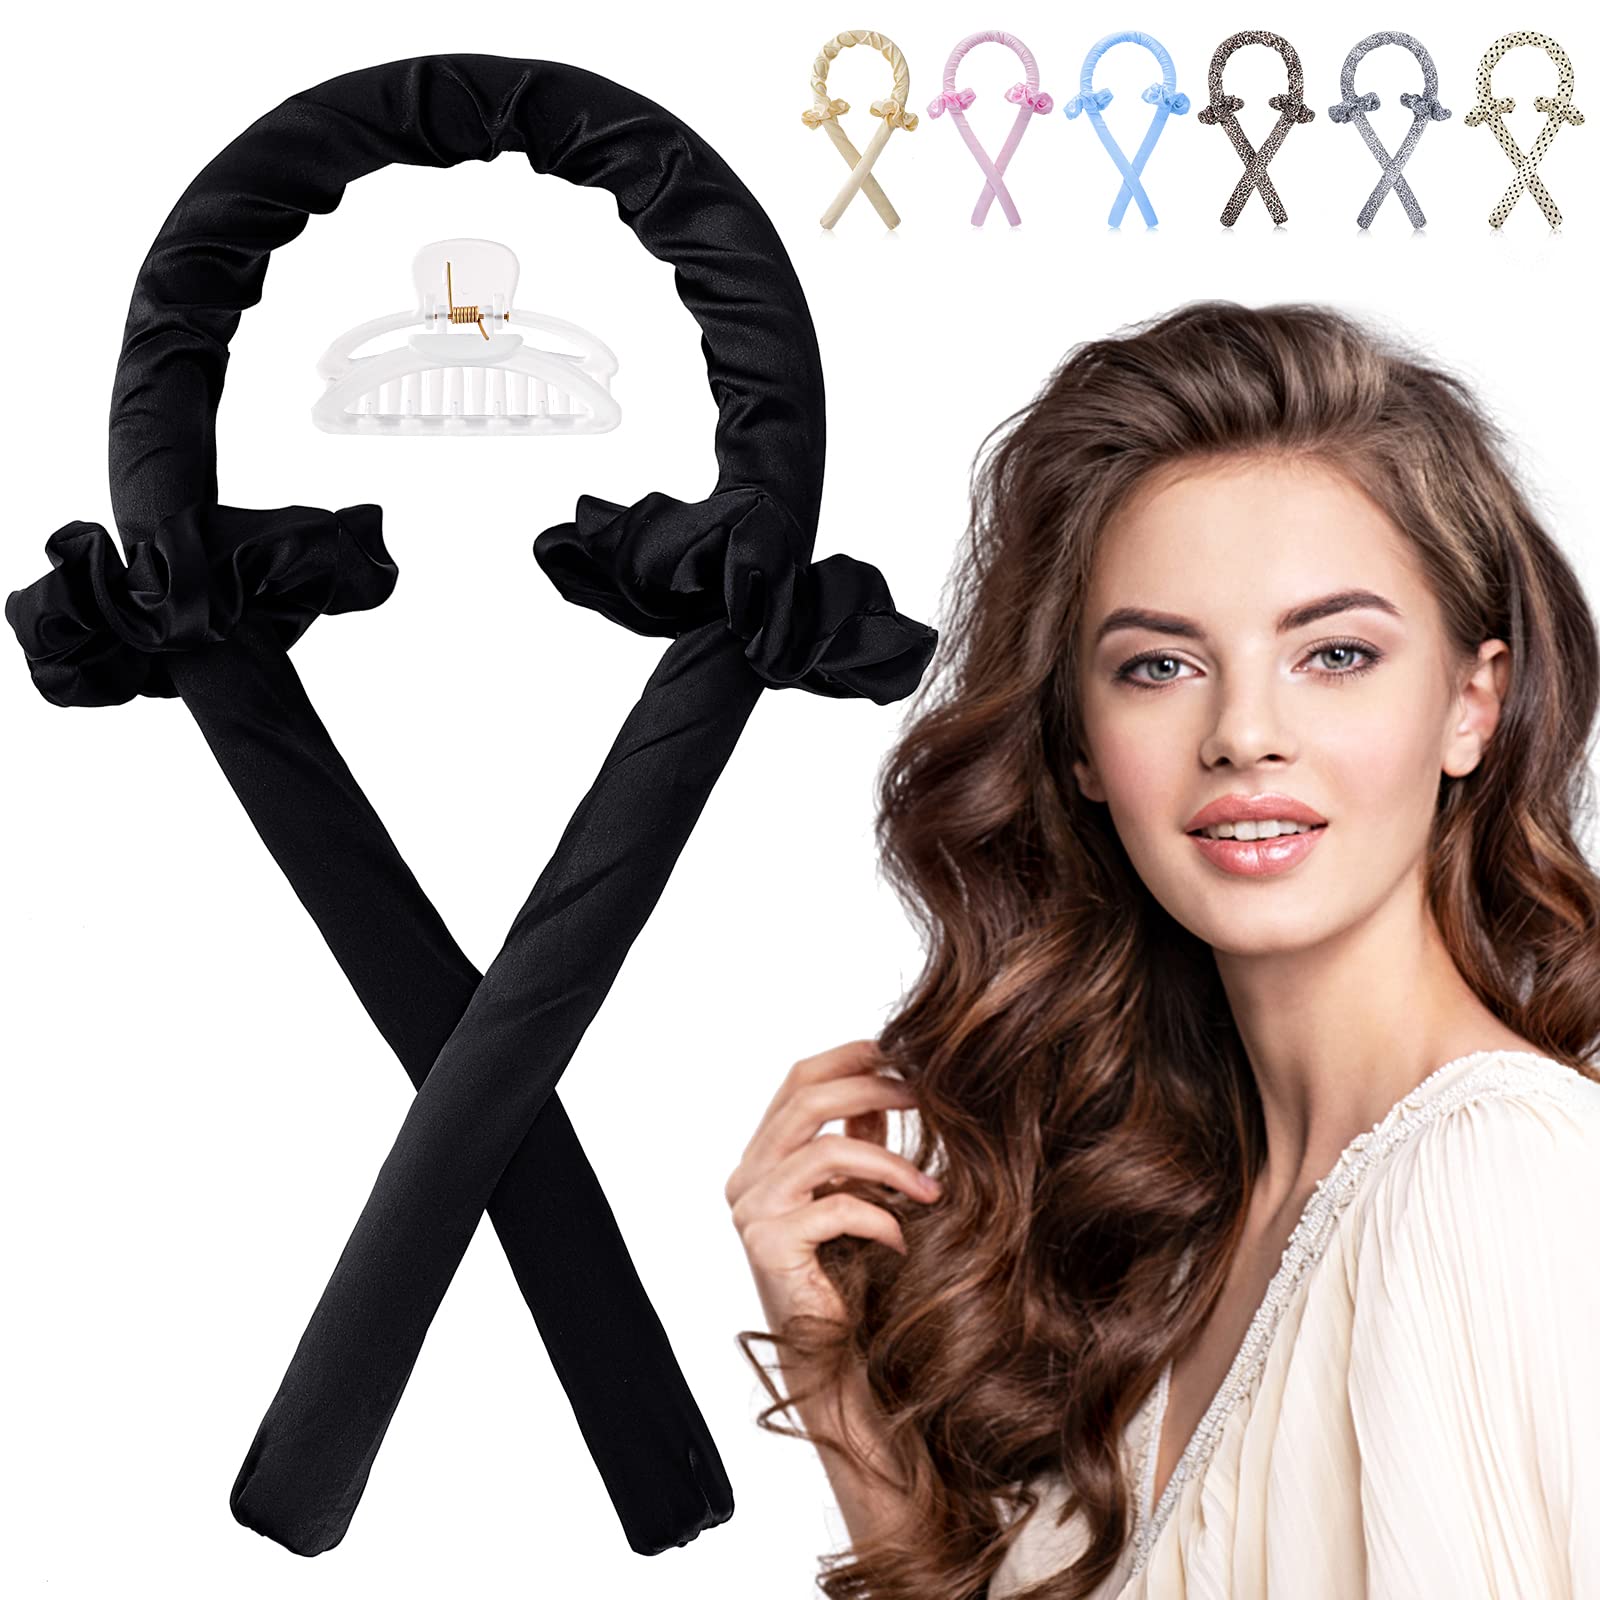 Heatless Hair Curlers for Long Hair, Lazy Crimper to Sleep in, Soft Wave  DIY Hair Rollers Styling Tool for Overnight No Heat Curling Rod Headband  for